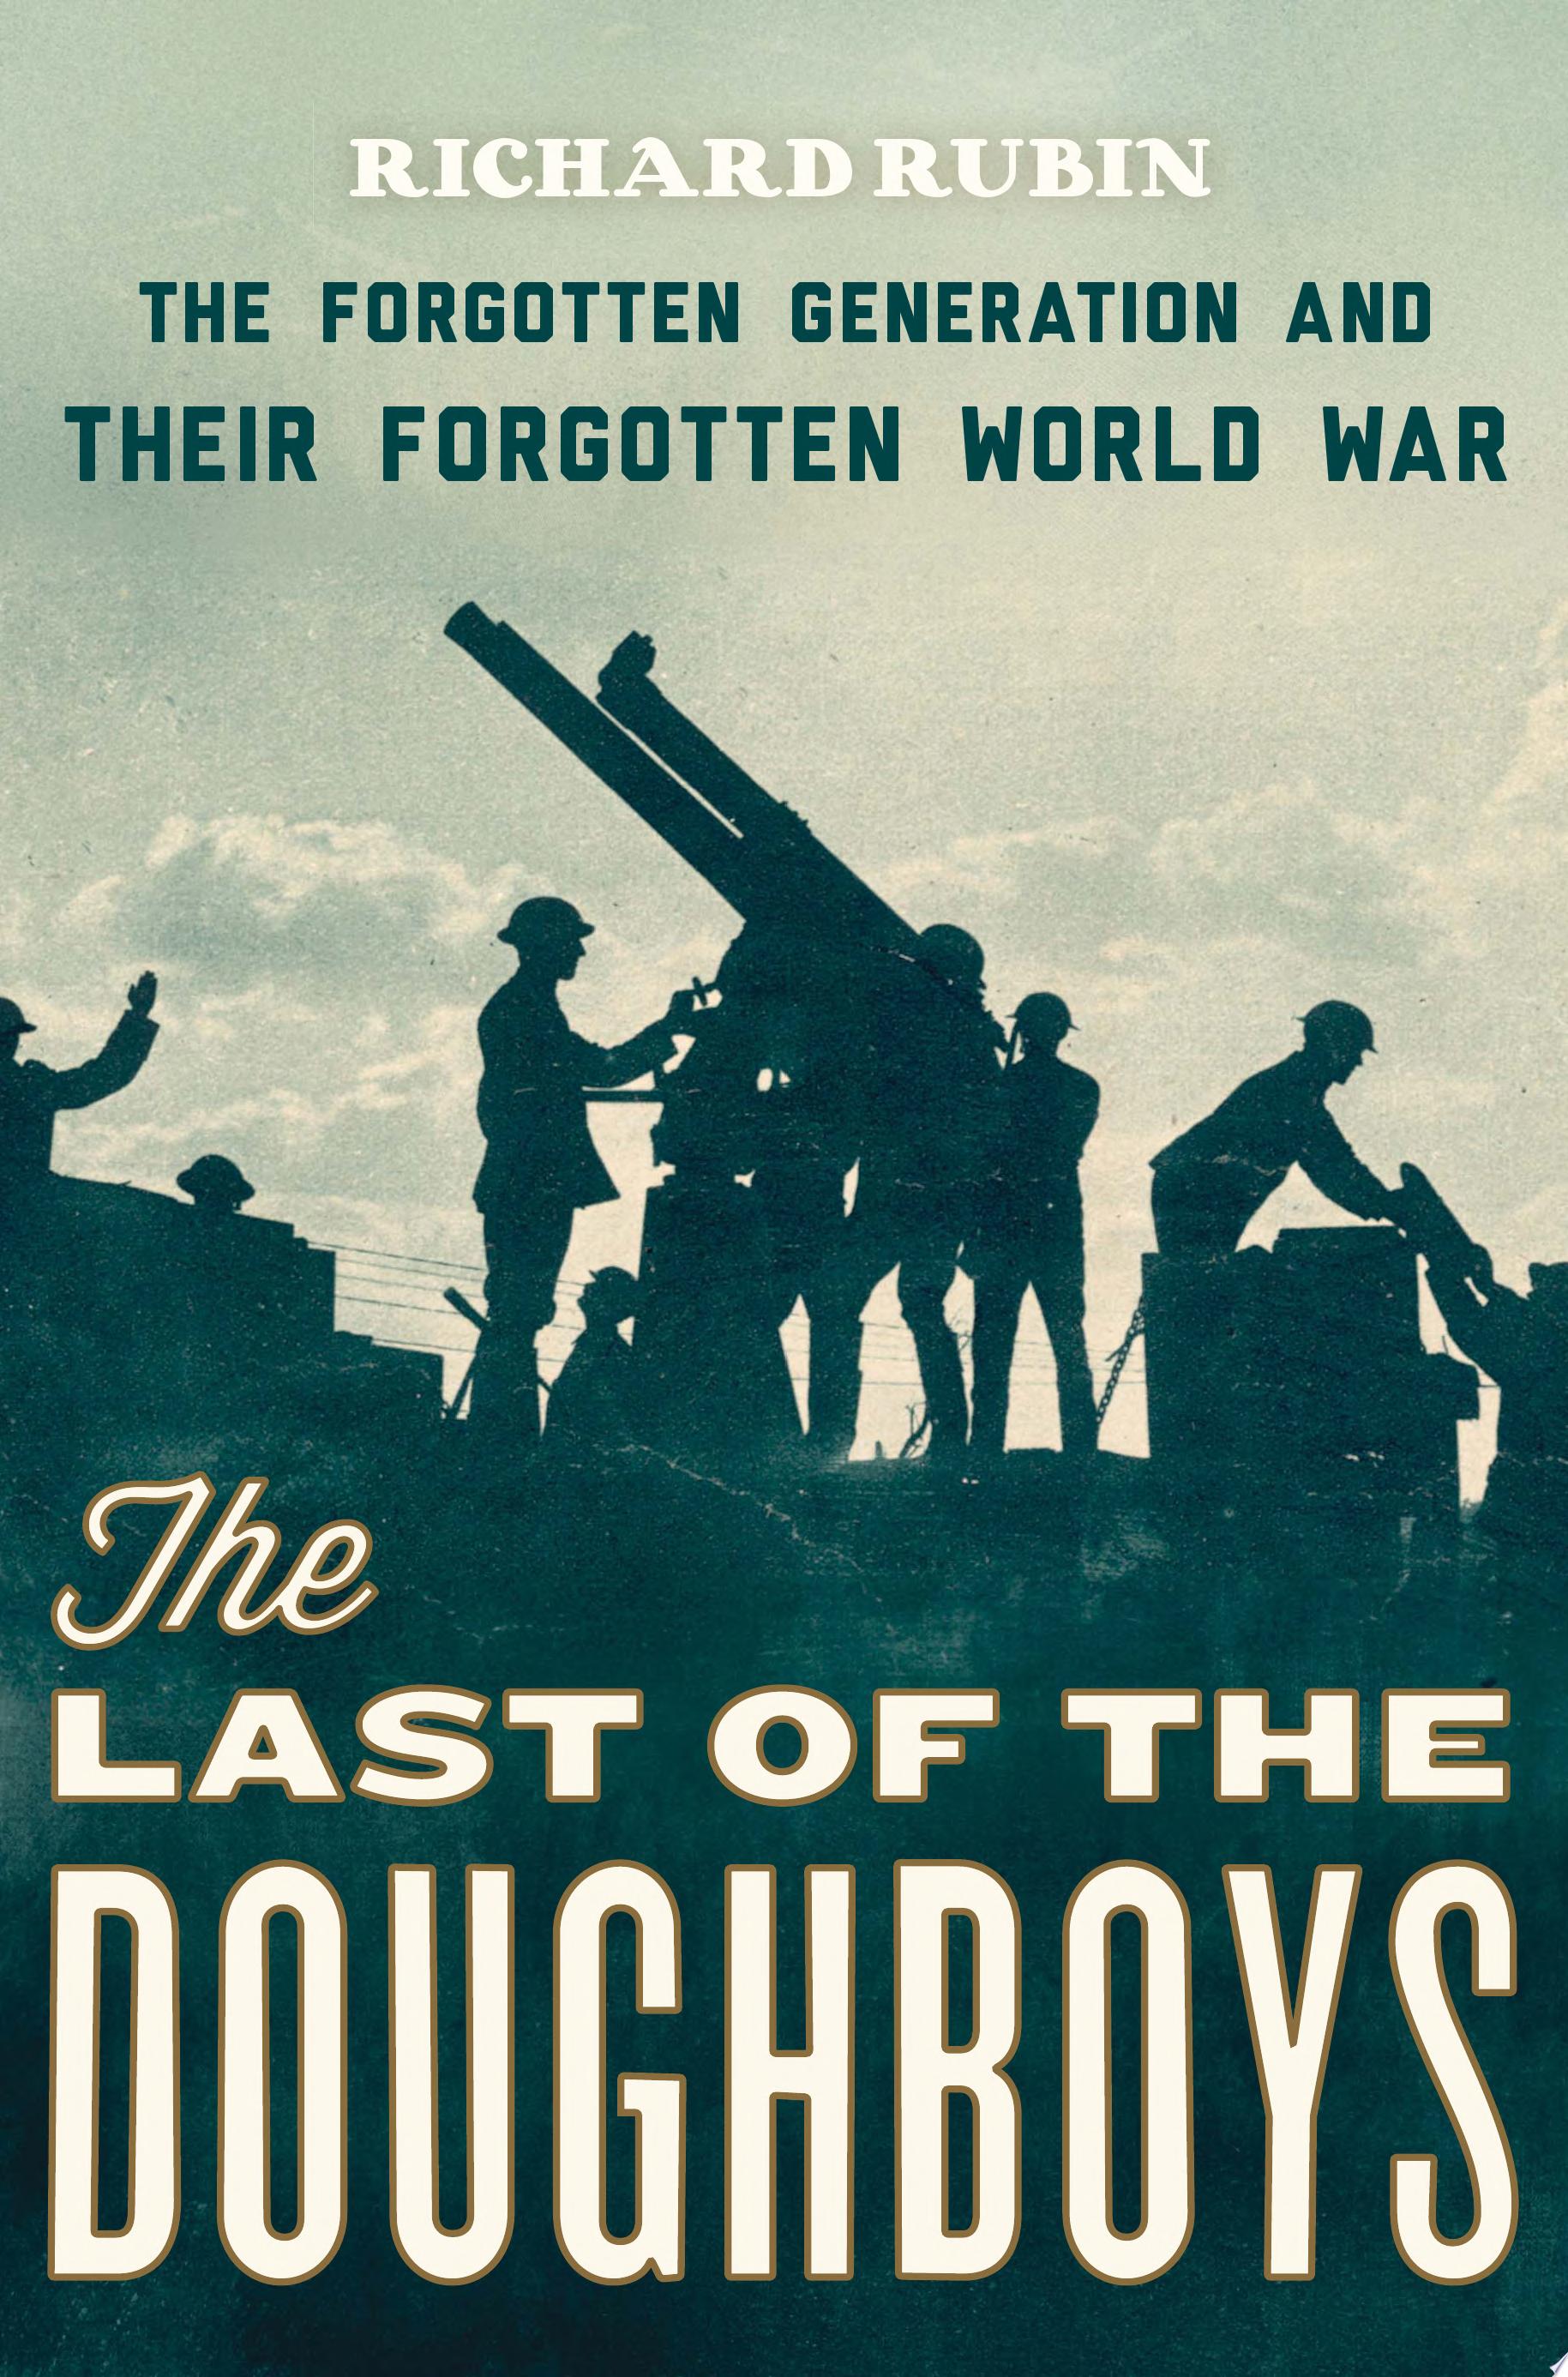 Image for "The Last of the Doughboys"